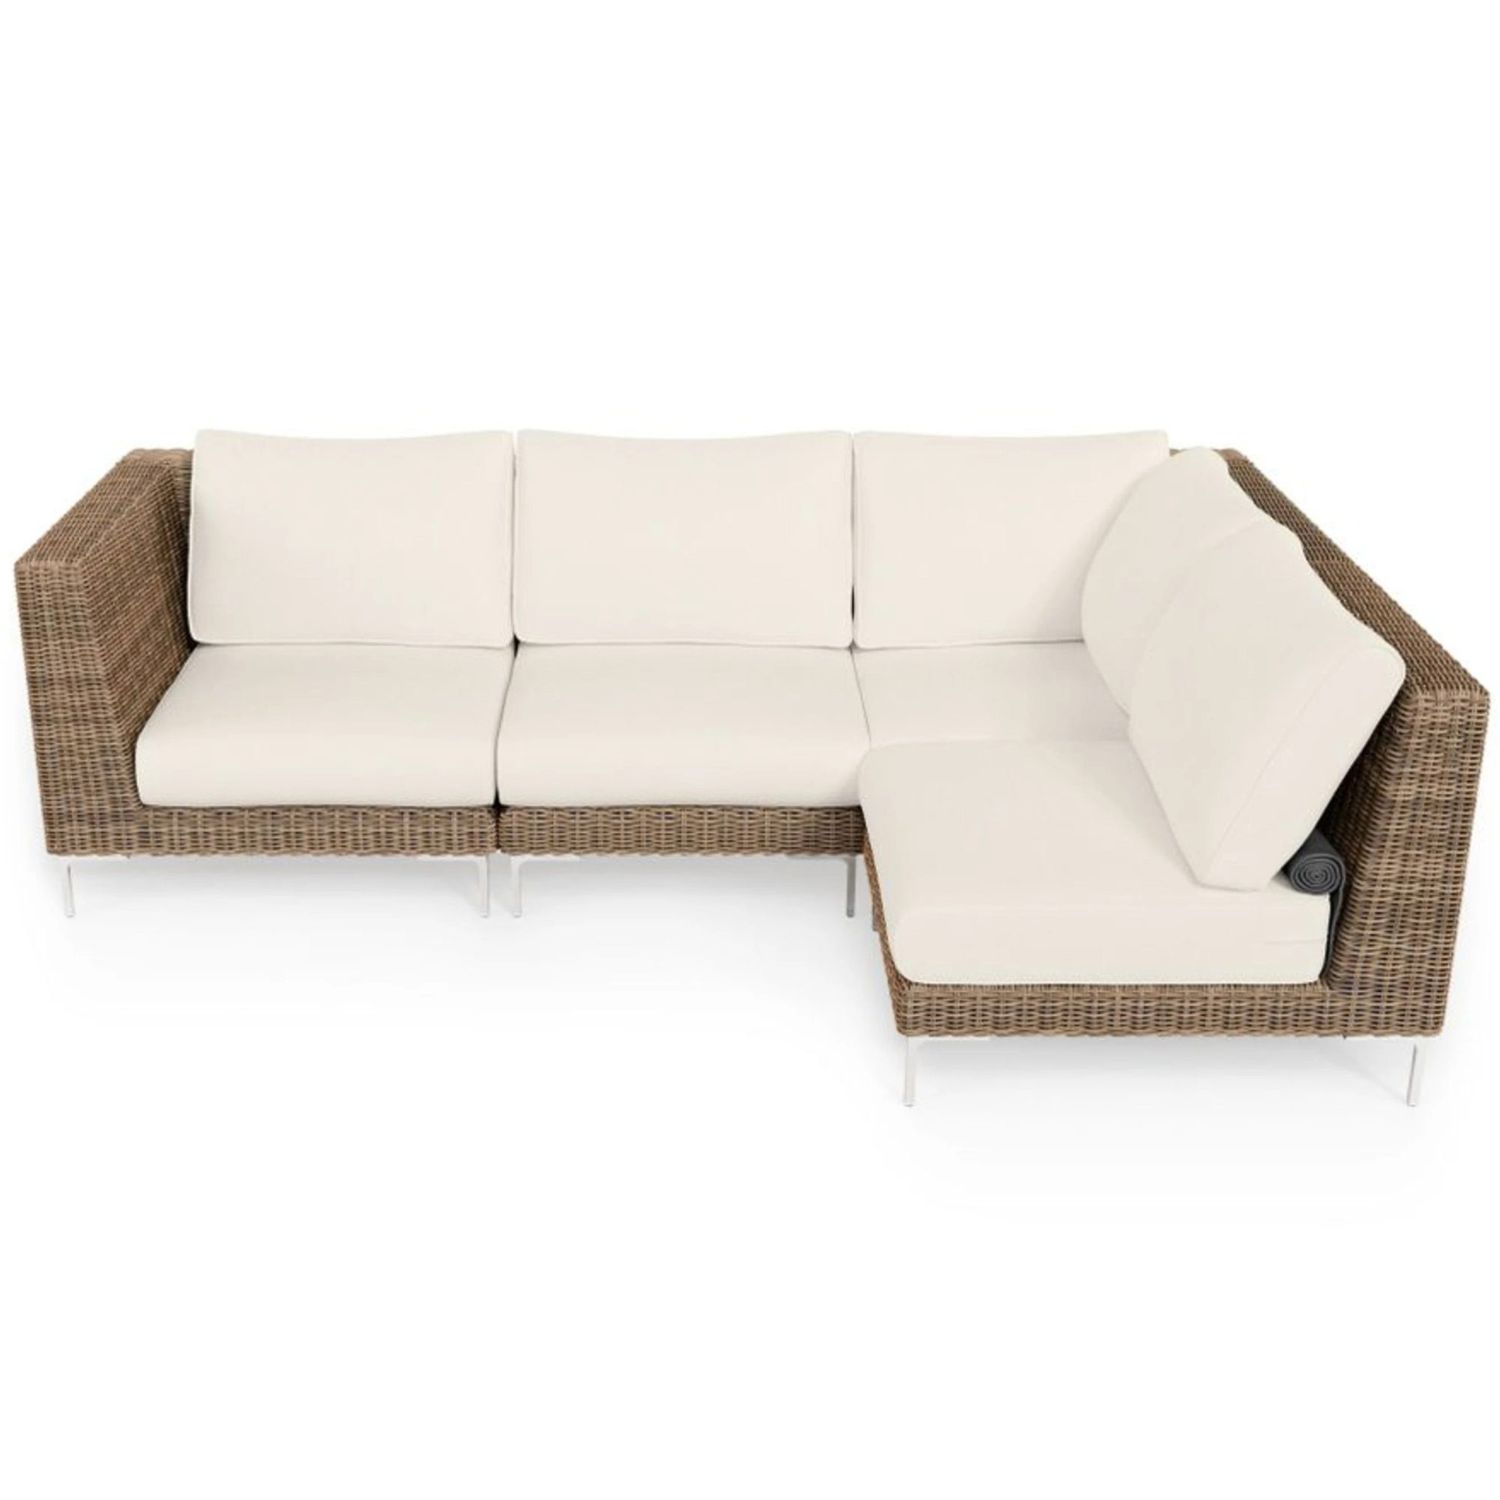 Outer Wicker Outdoor Sectional